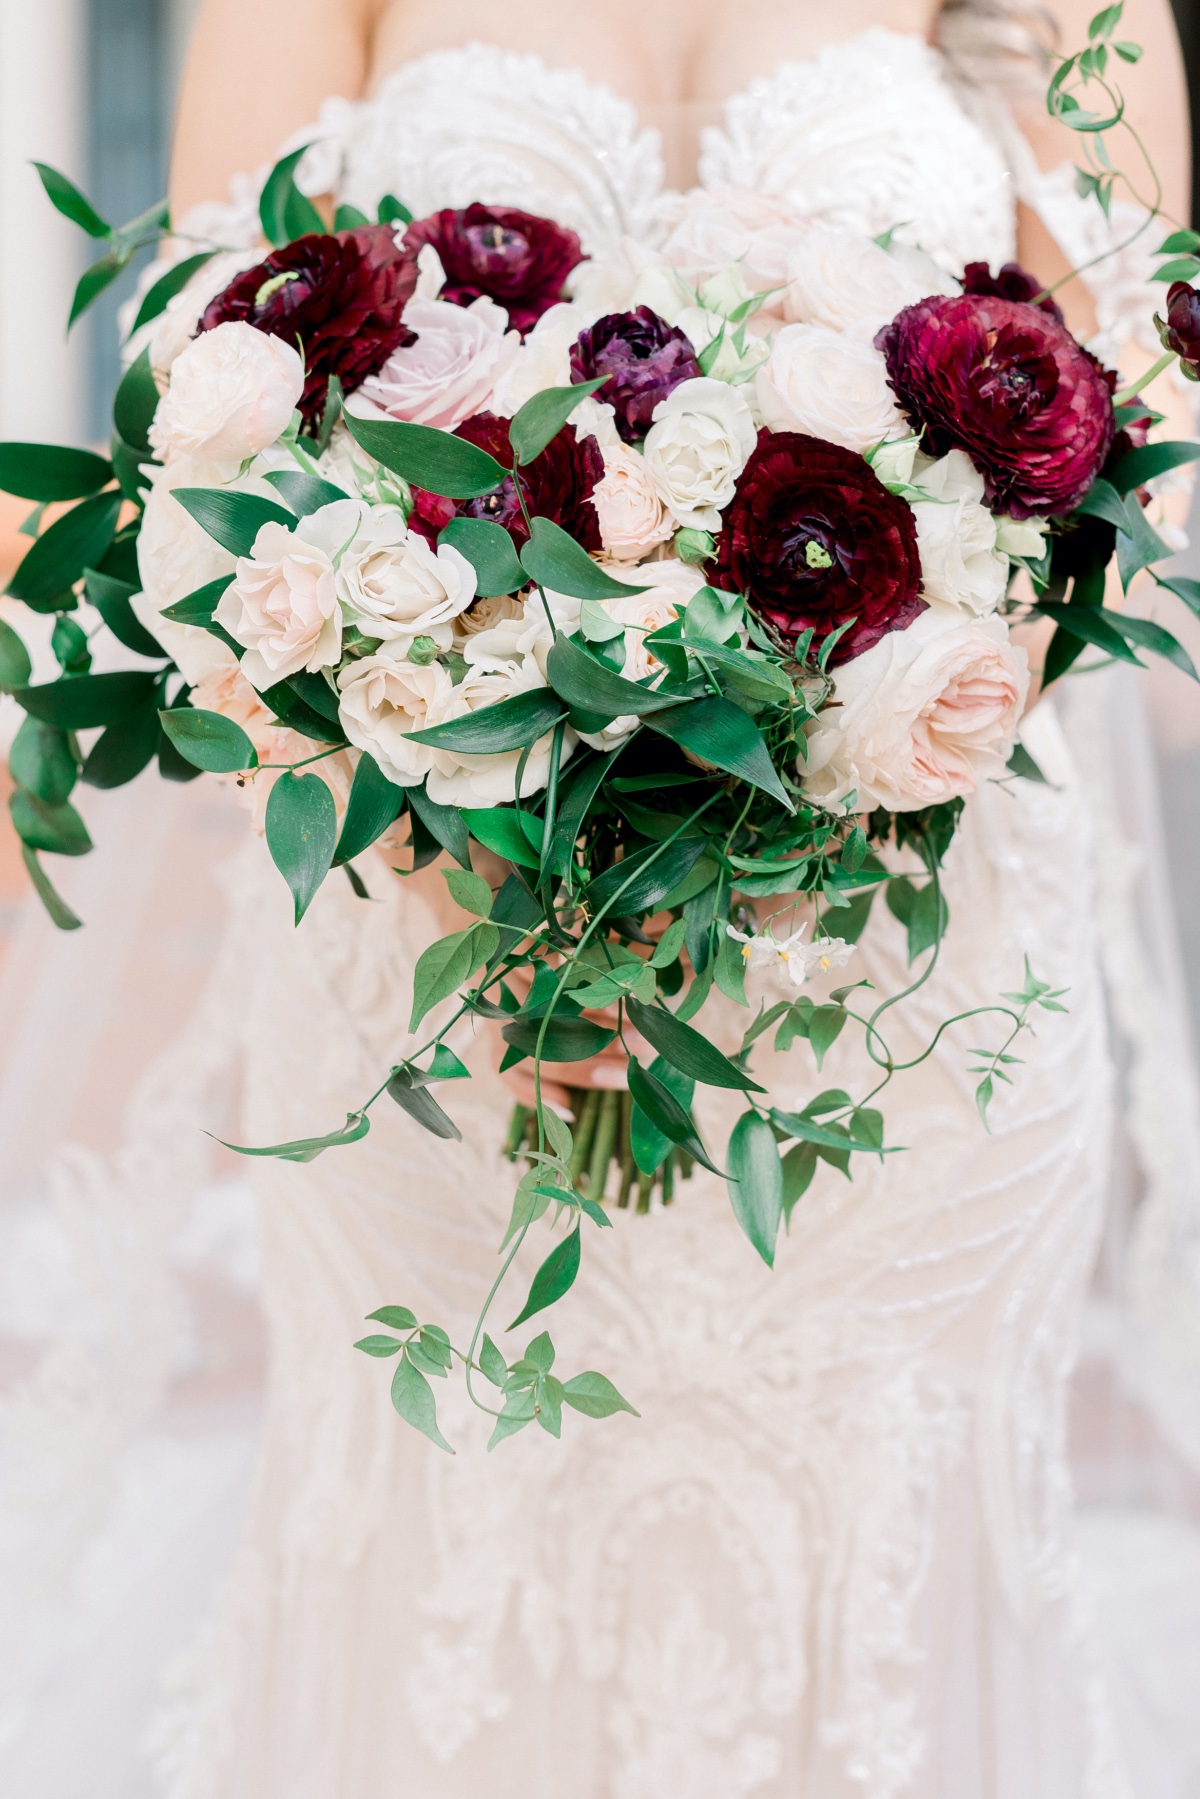 Burgundy and blush wedding bouquet with greenery